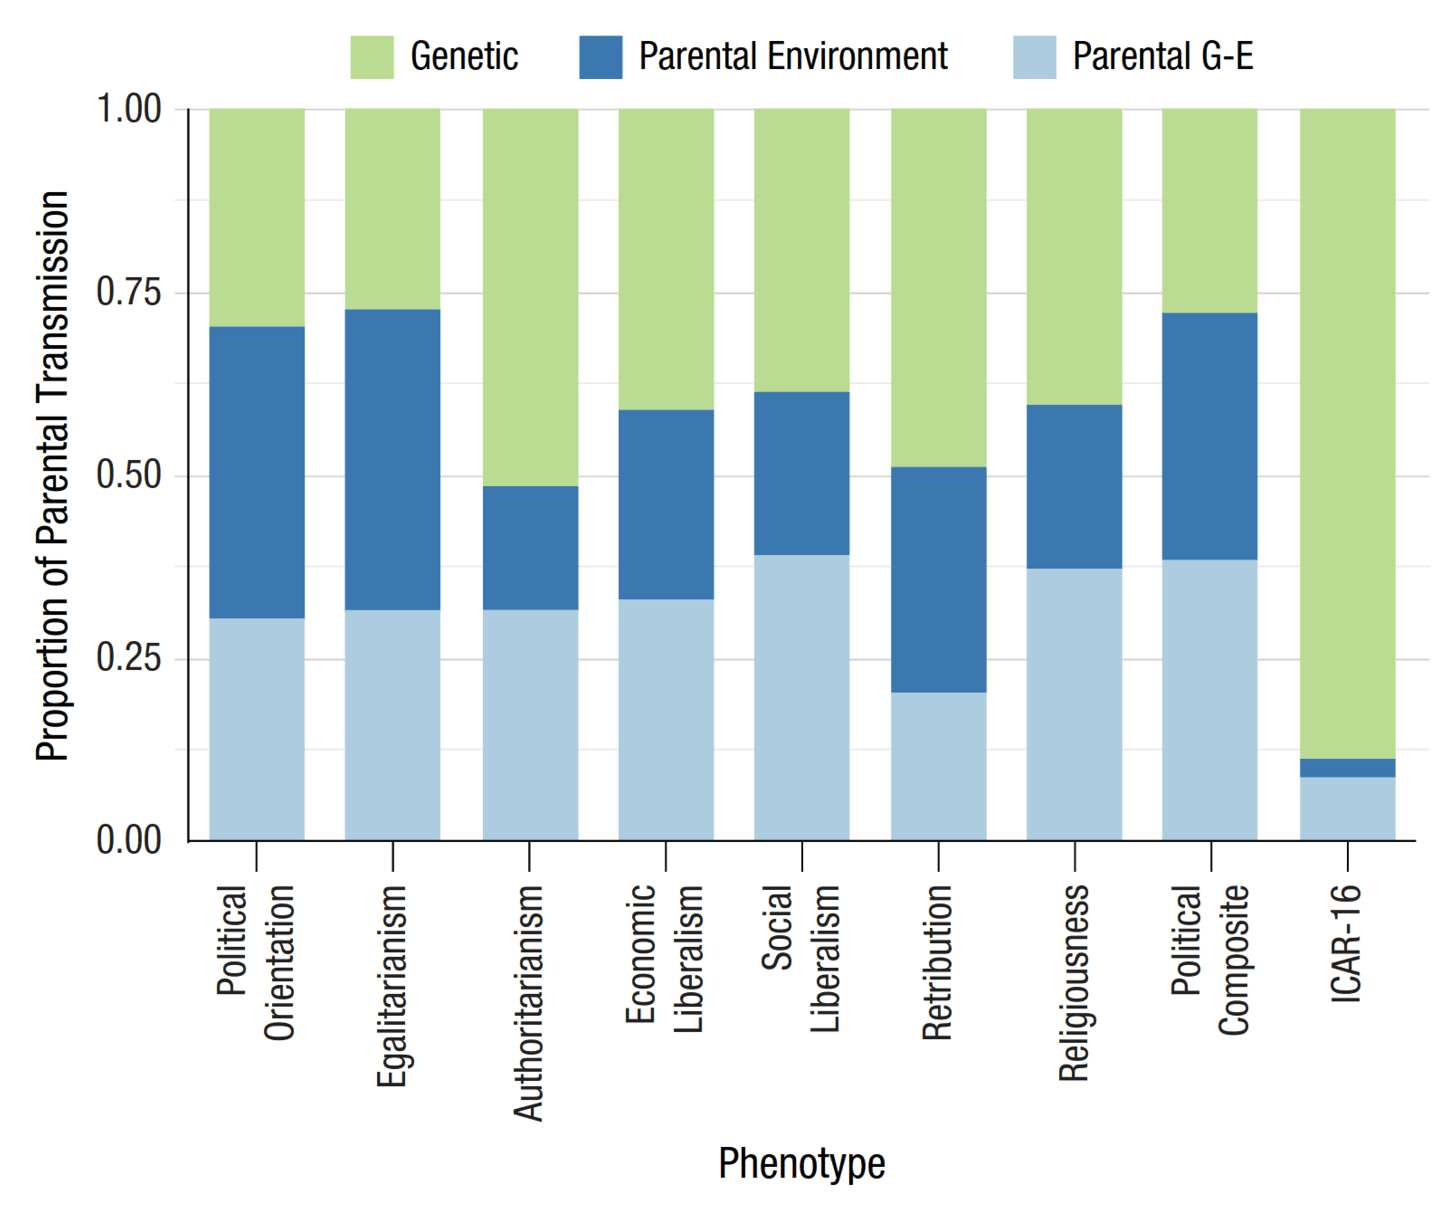 Figure 3: Proportion of variance in parent-offspring transmission attributable to parent genetics, parental environment, and parental gene-environment (G-E) covariance for each of the 7 political-attitude scales, their composite score, and the 16-item short form of the International Cognitive Ability Resource (ICAR-16; included as a negative control)